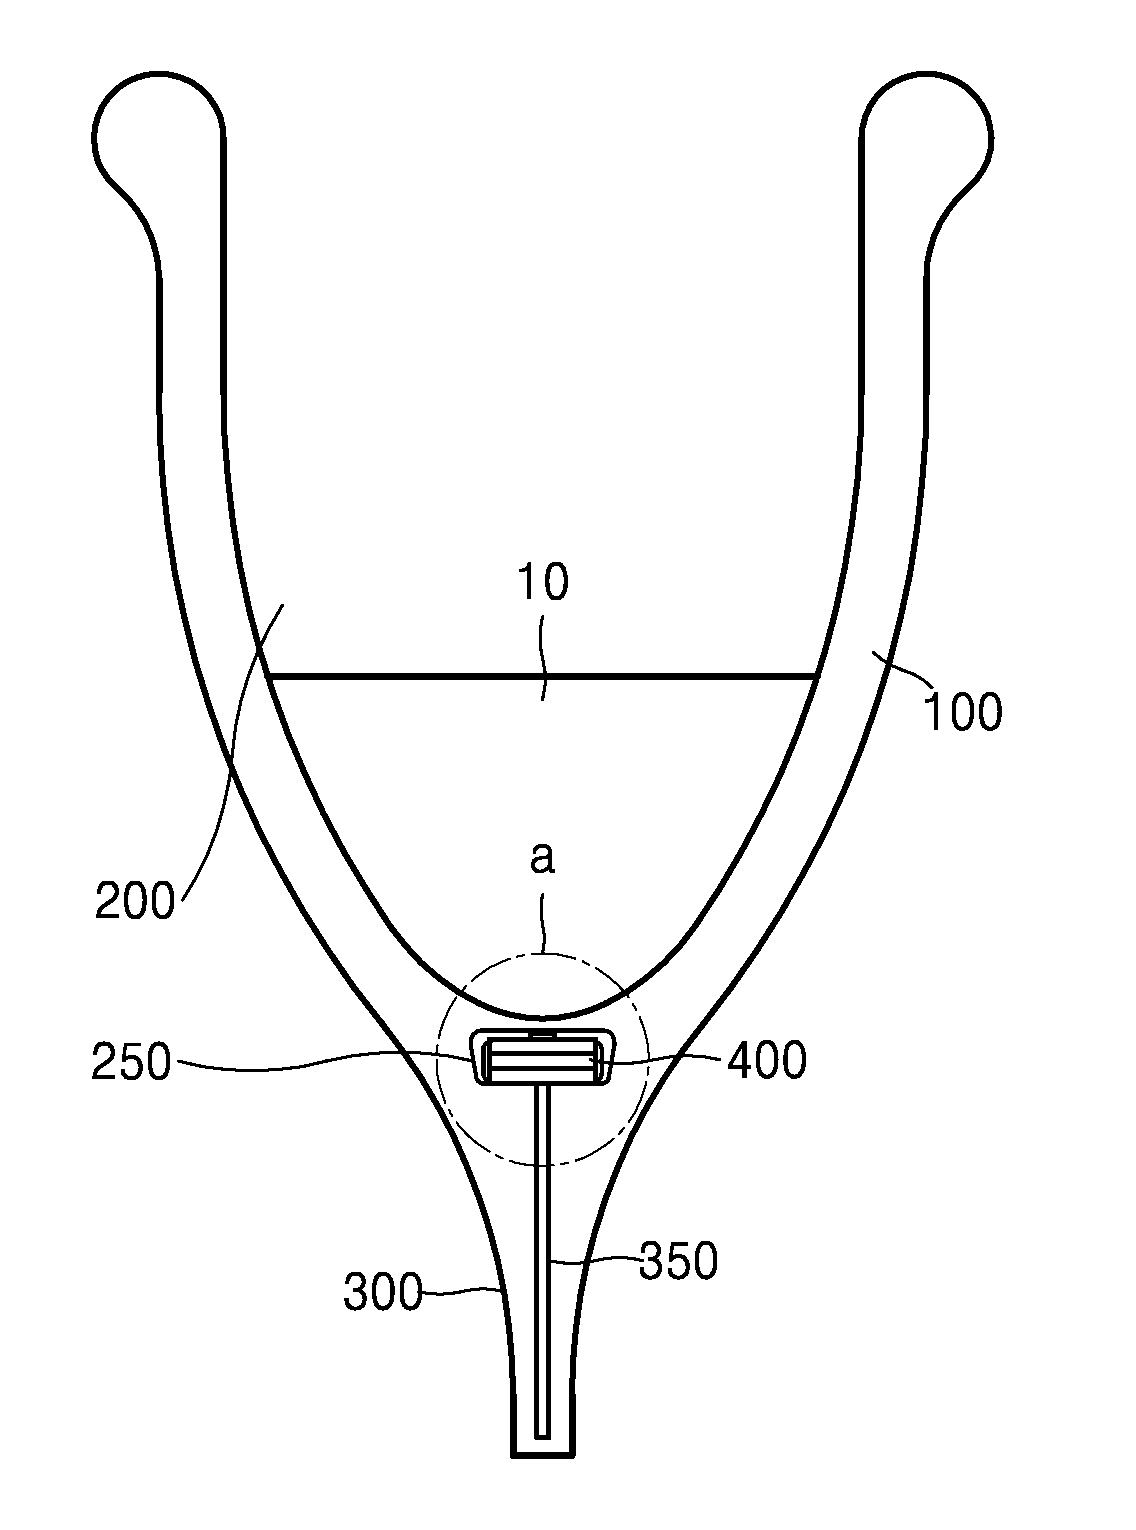 Smart menstrual cup and method for measuring menstrual blood using smart menstrual cup